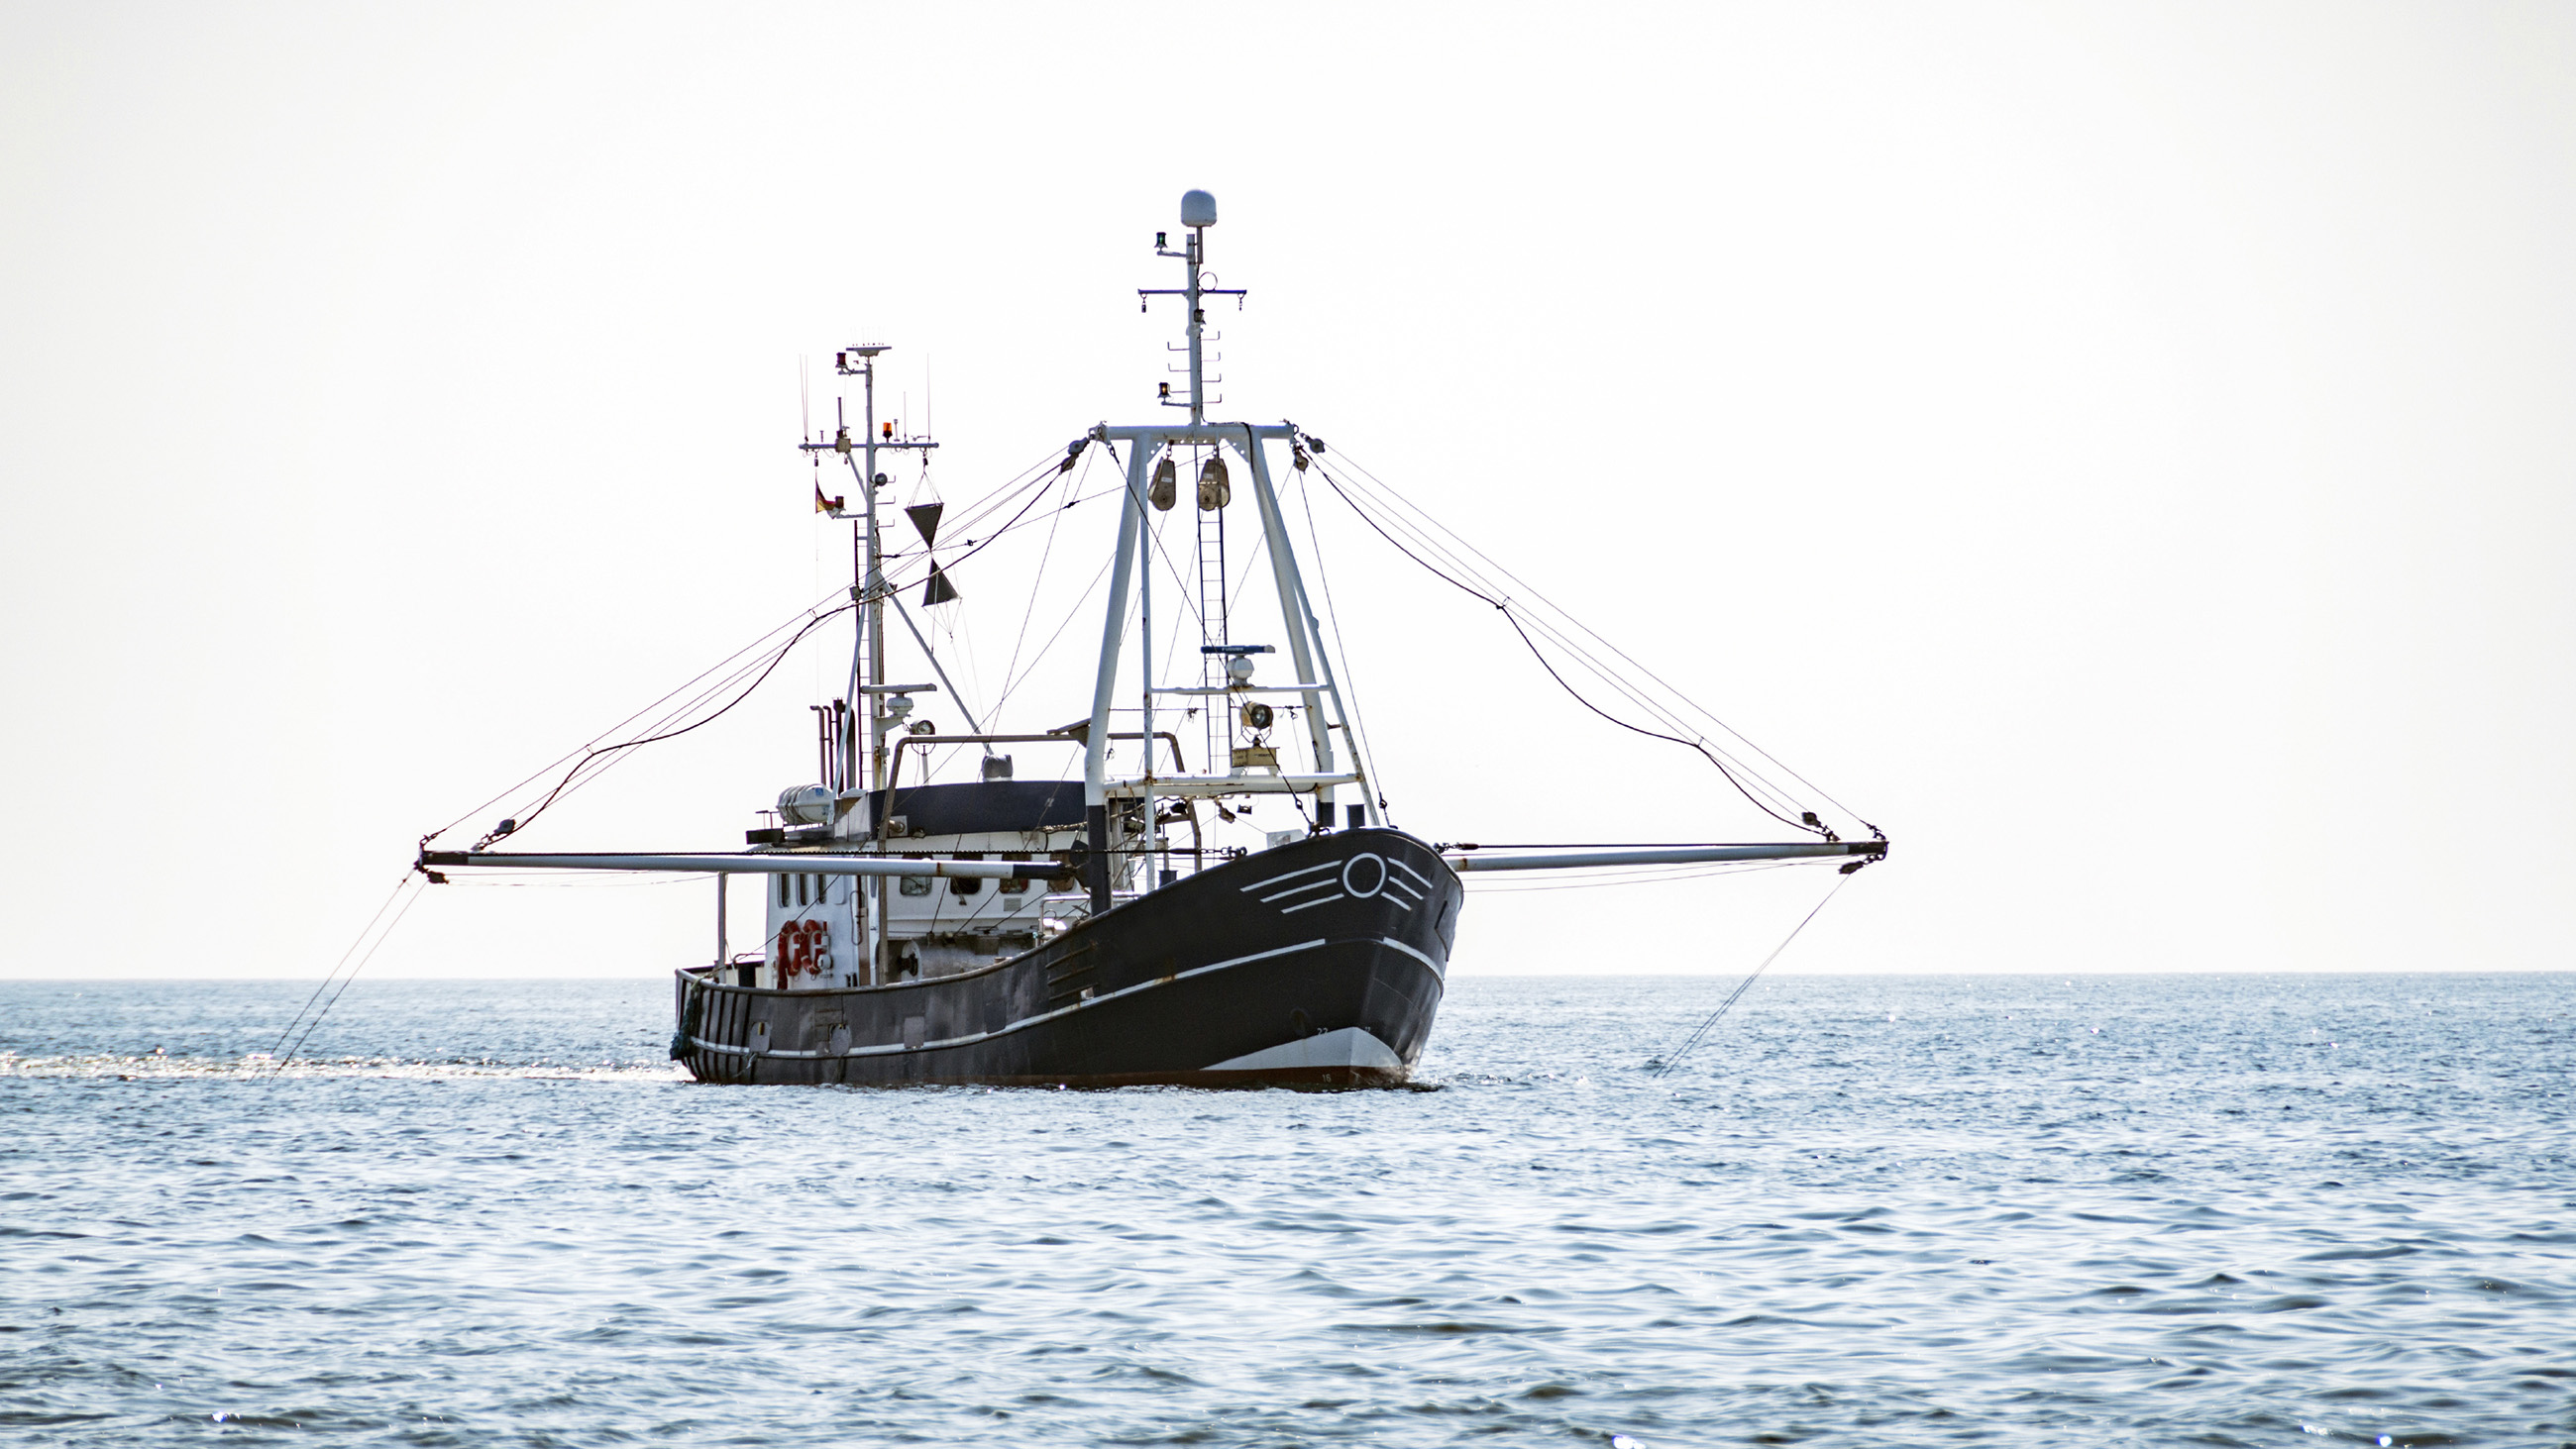 A new study shows that a large number of illegal fishing vessels are still able to obtain legal insurance.